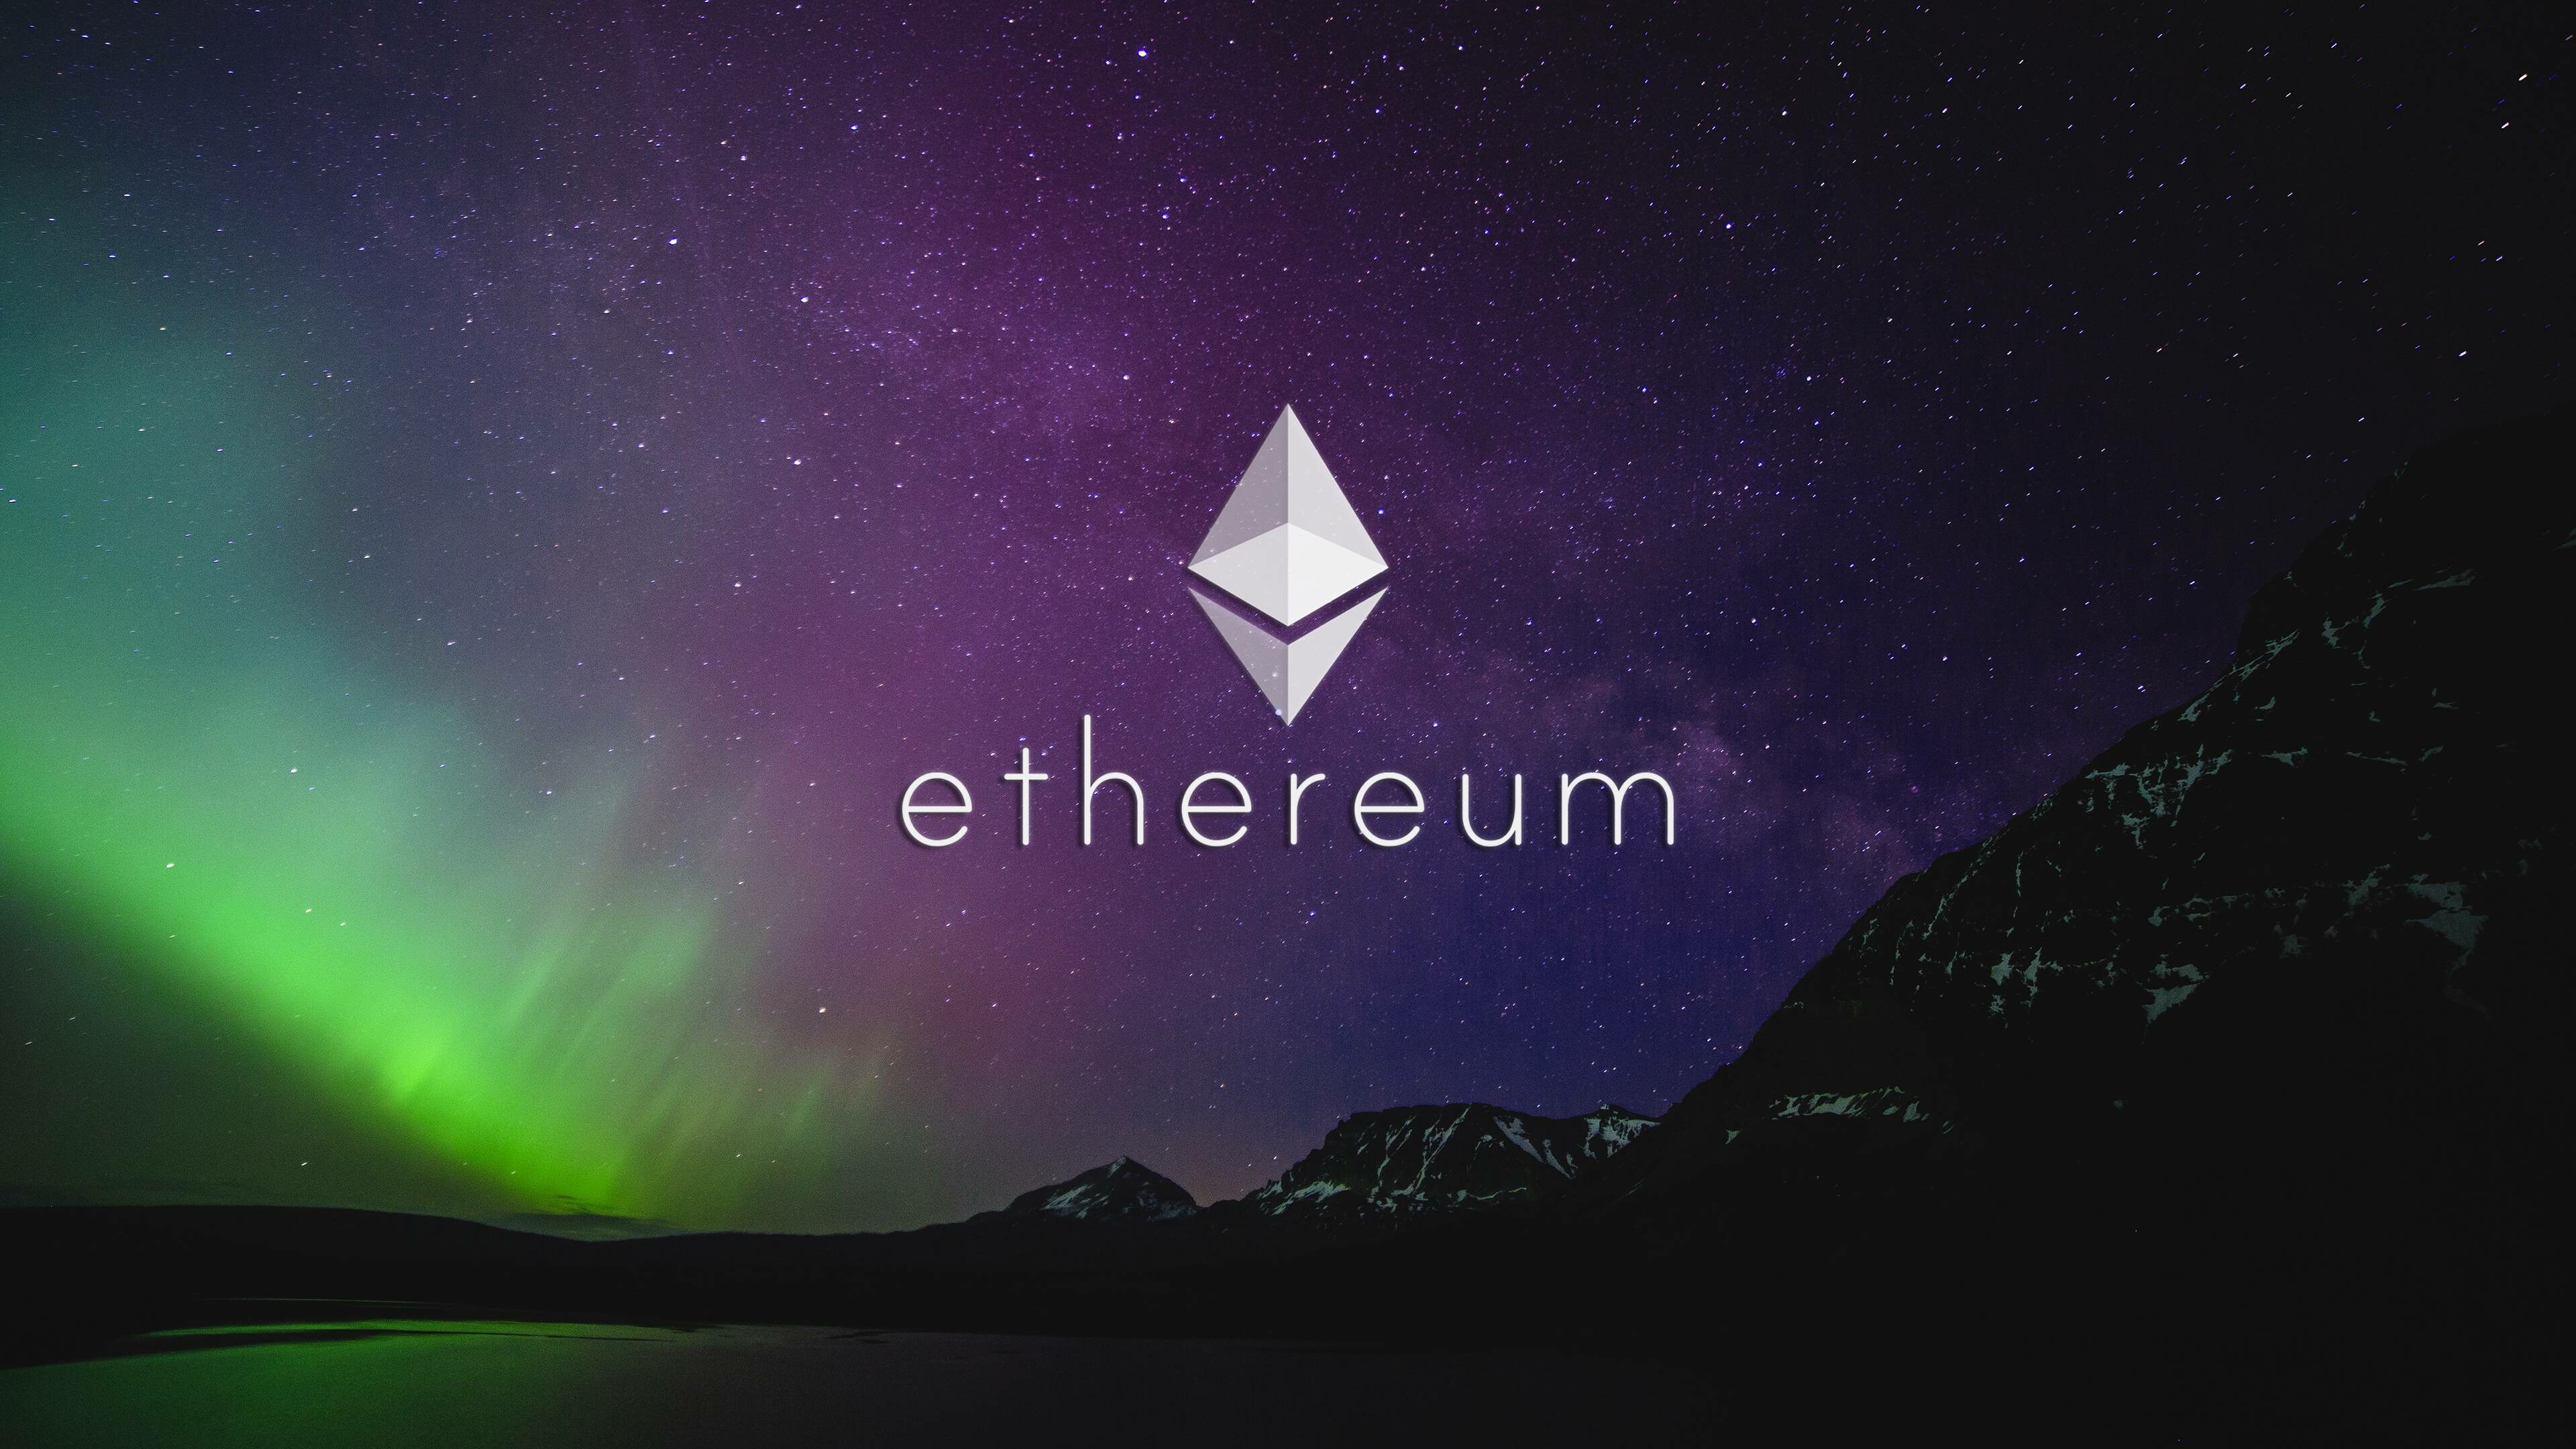 Cryptocurrency: Ethereum, A decentralized, open-source blockchain with smart contract functionality. 3840x2160 4K Wallpaper.